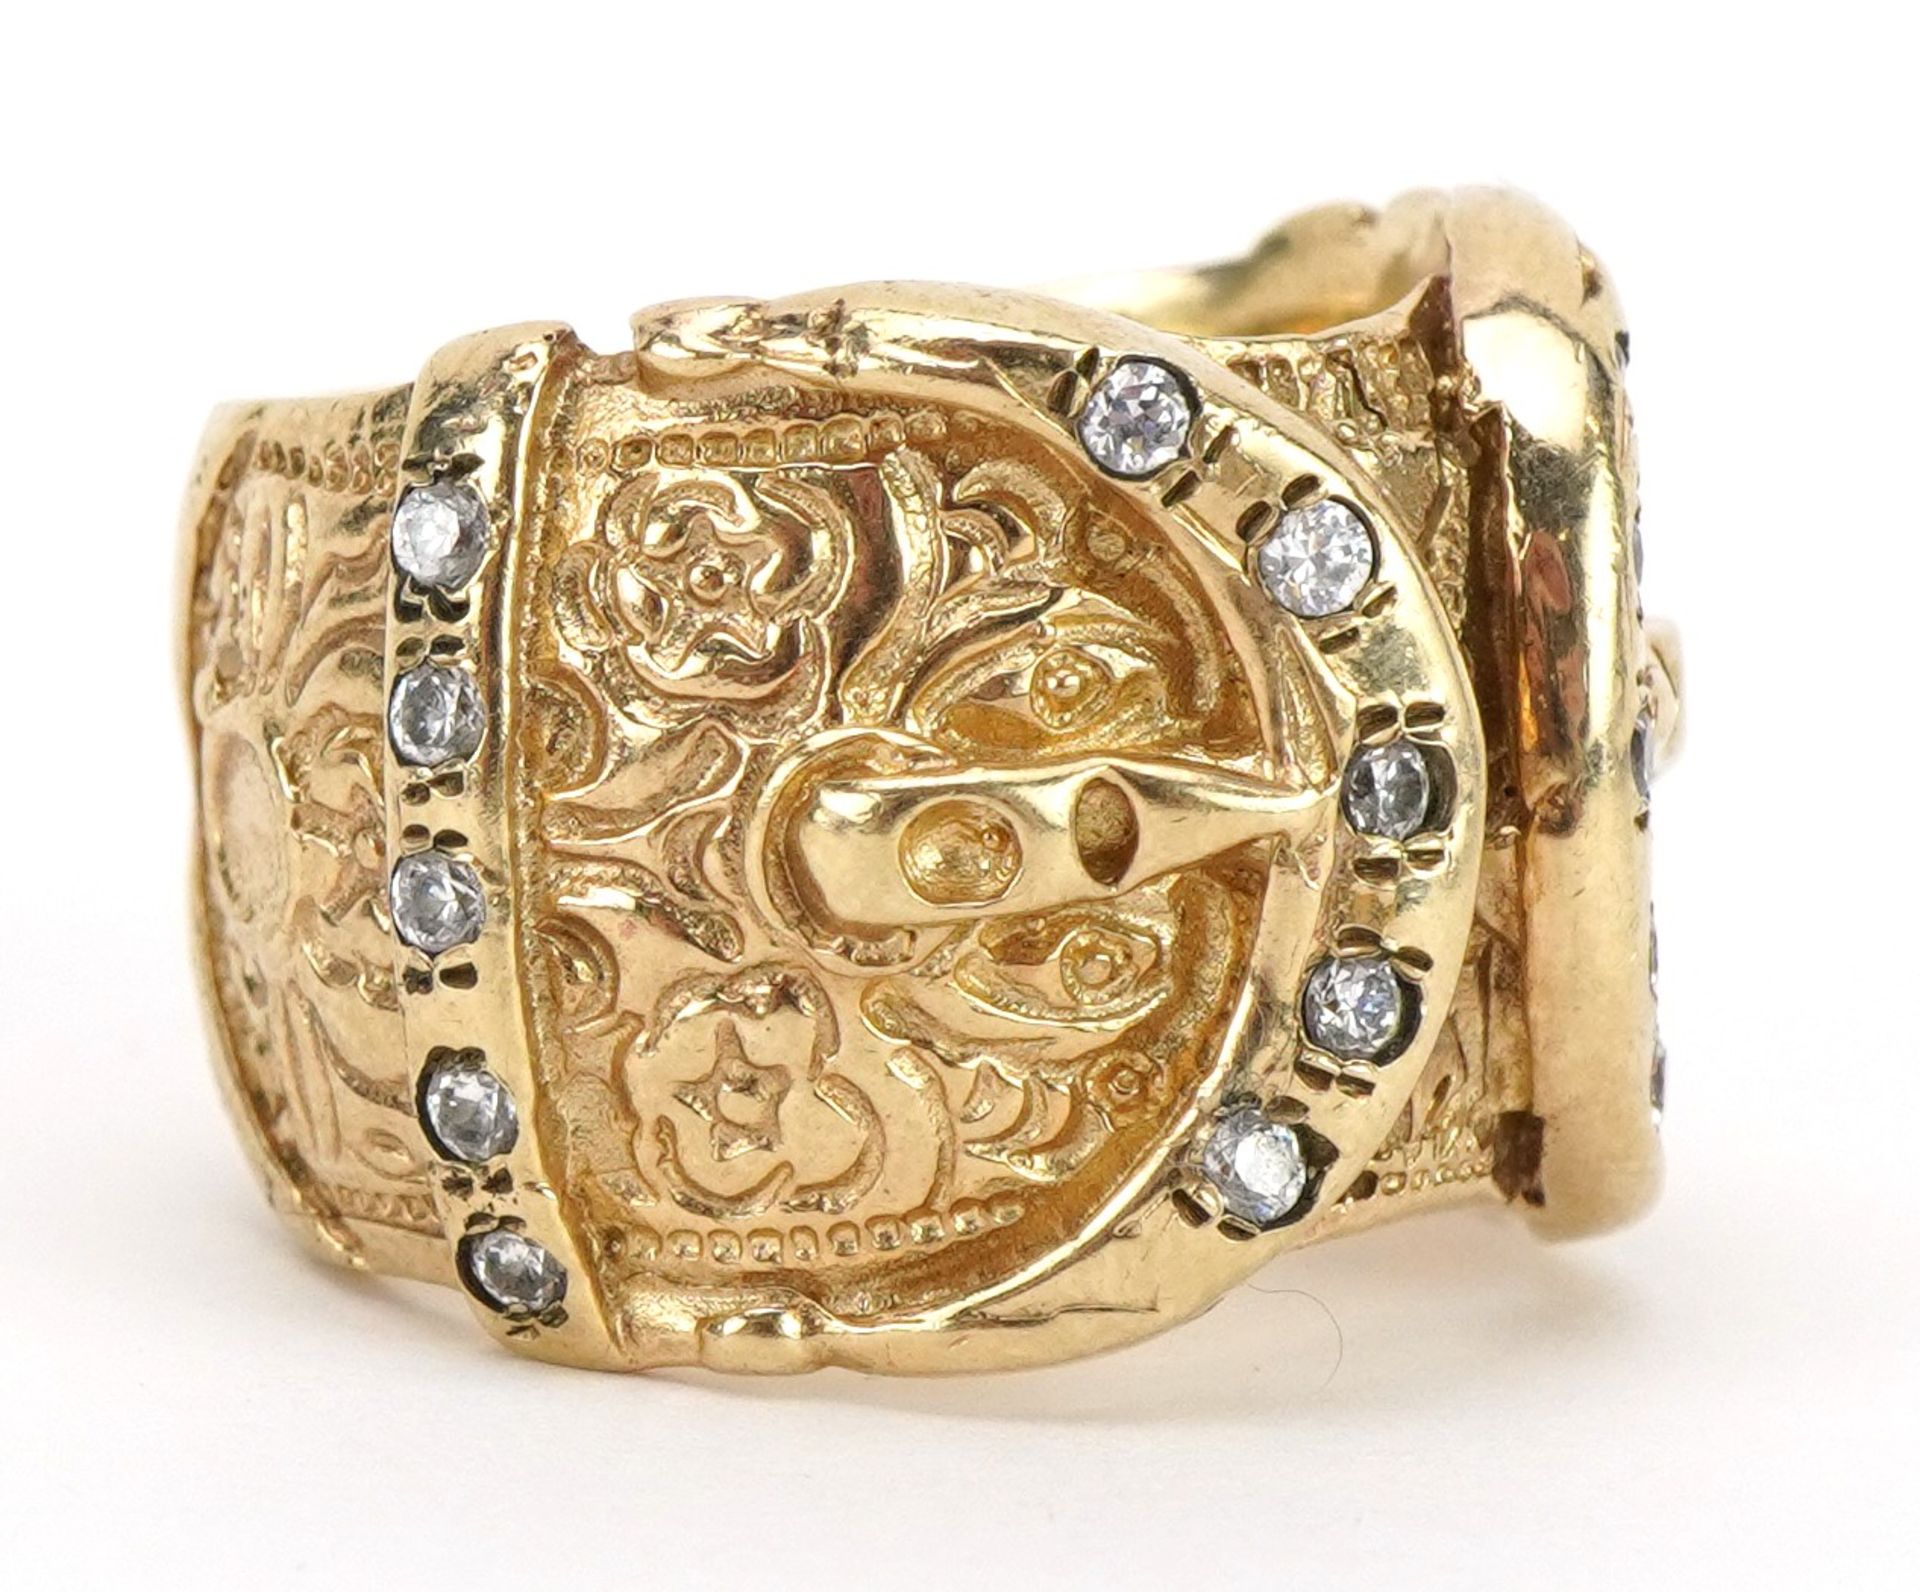 Heavy gentlemen's 9ct gold double buckle ring set with clear stones, size U, 25.0g - Image 3 of 6